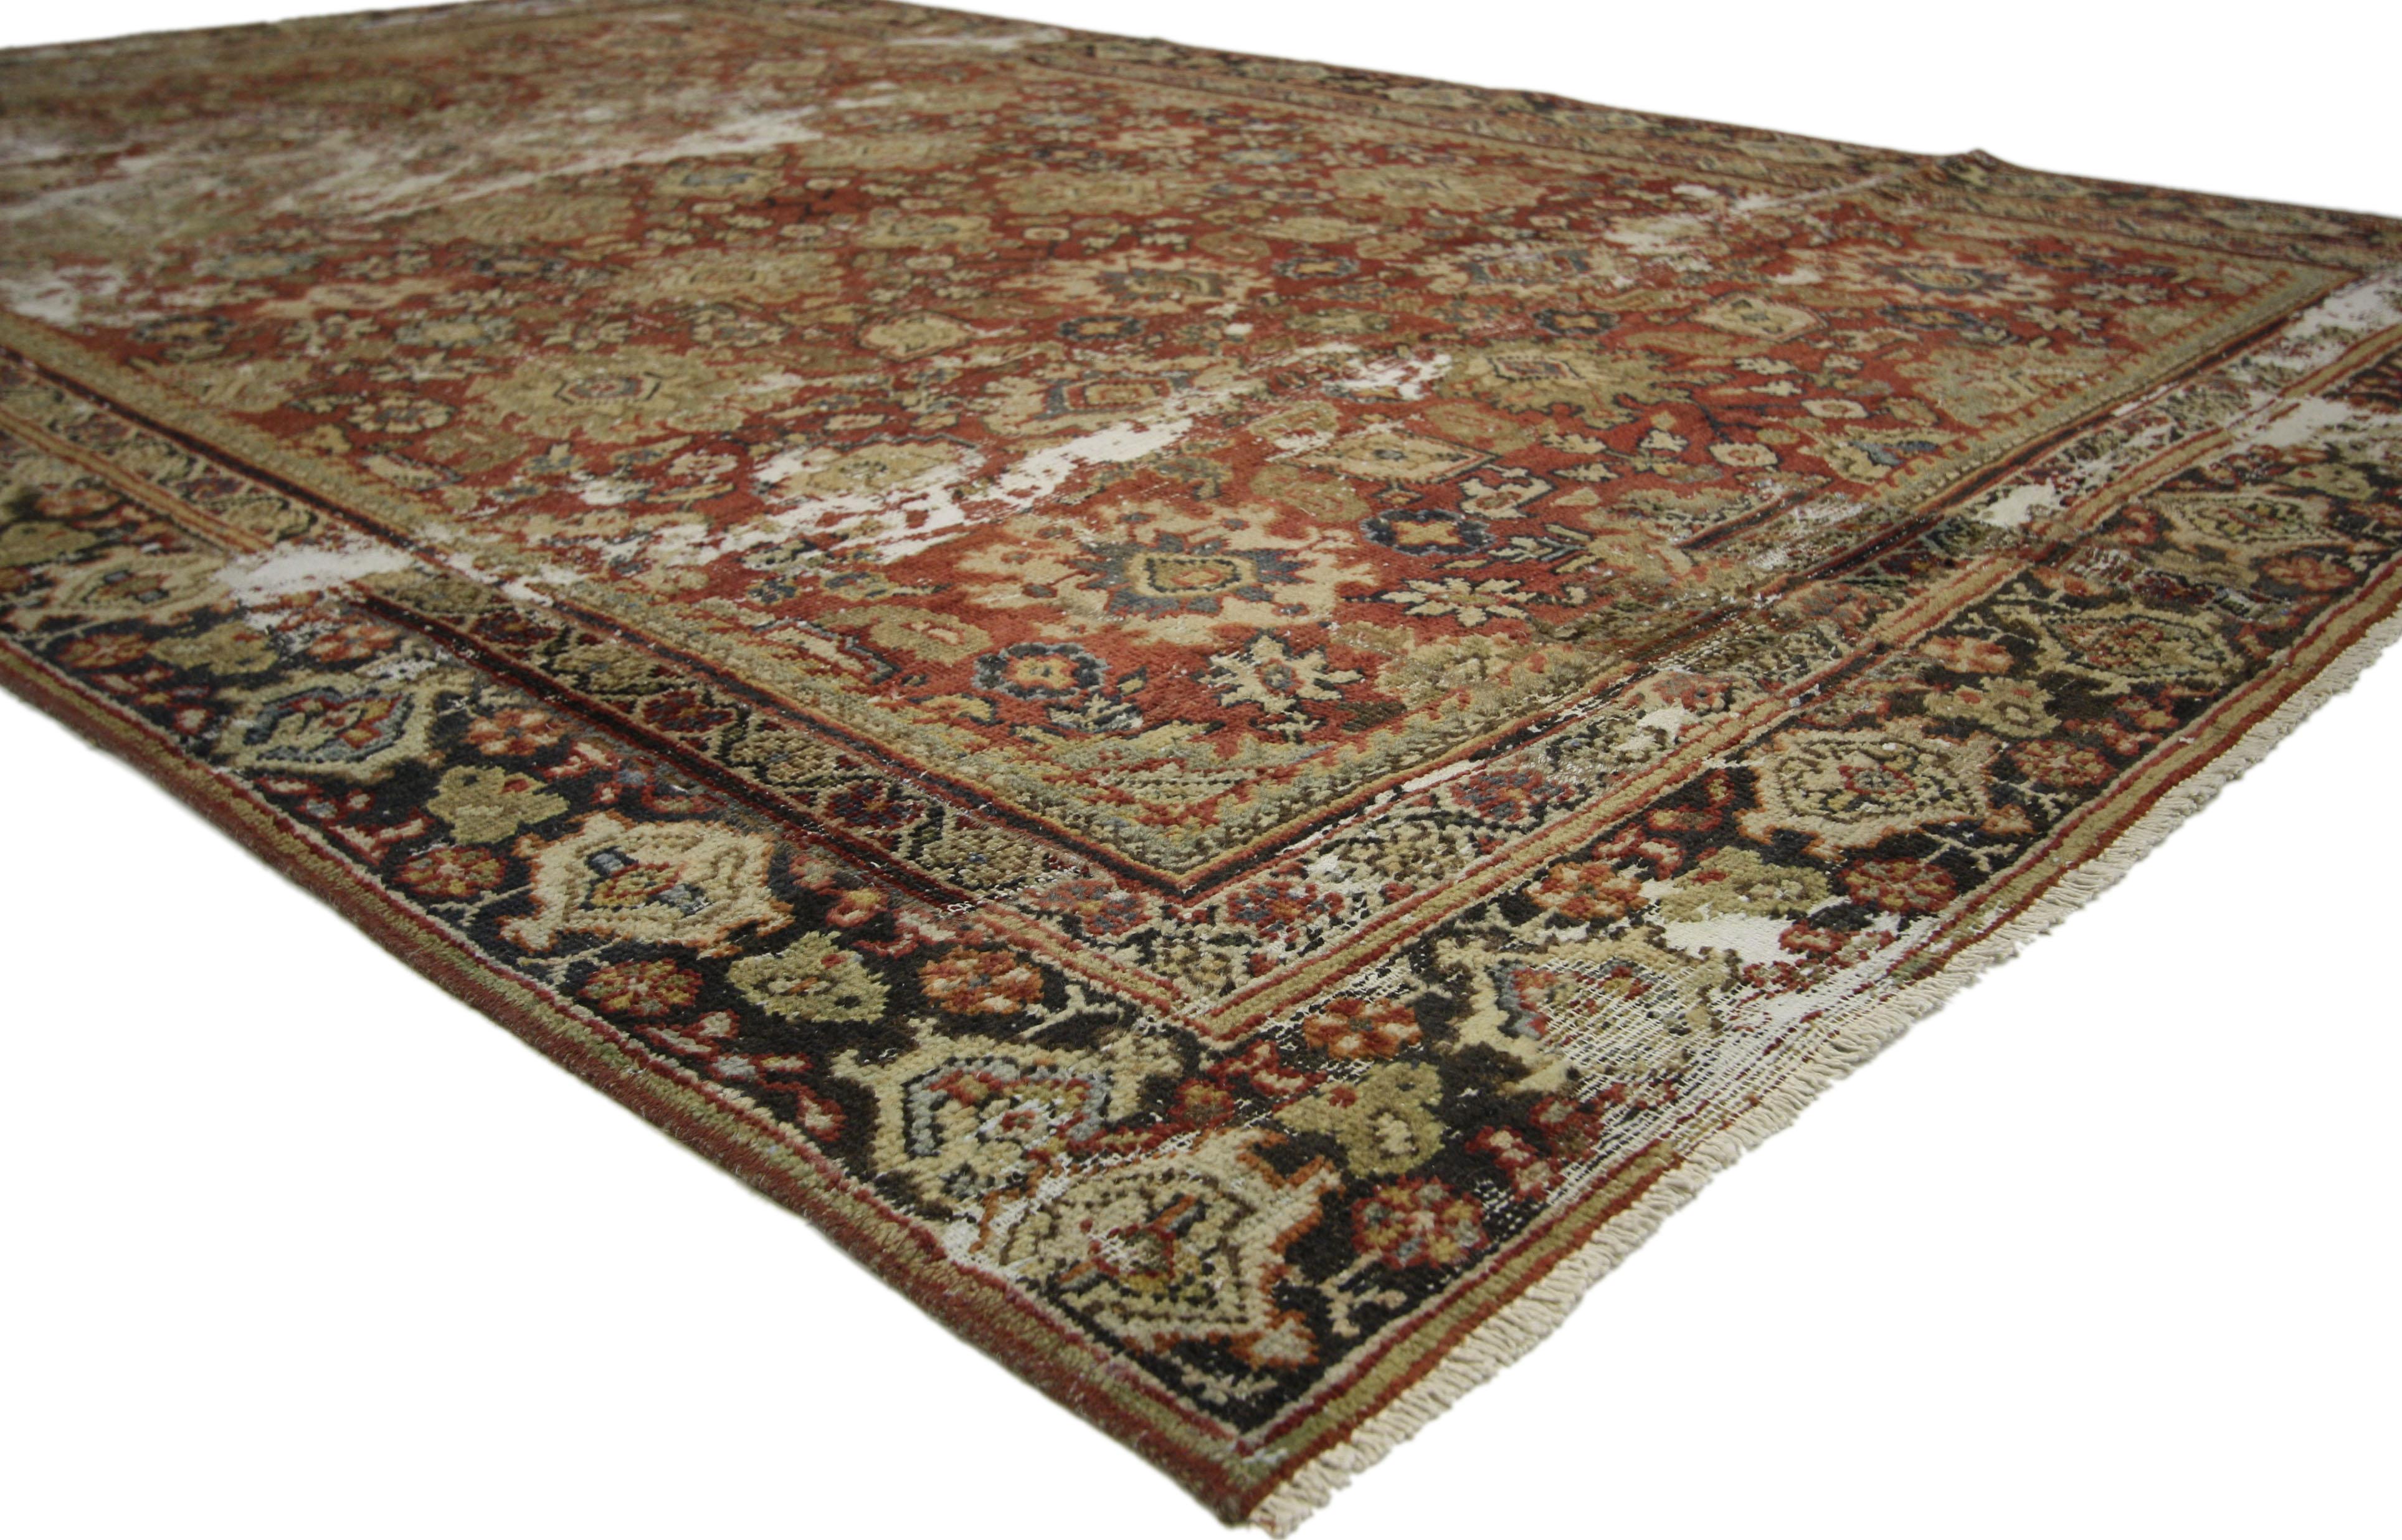 60682 Distressed Antique Persian Mahal Rug with Traditional English Rustic Style 06’04 x 09’07. With its perfectly worn-in charm and rustic sensibility, this hand-knotted wool distressed antique Persian Mahal rug will take on a curated lived-in look